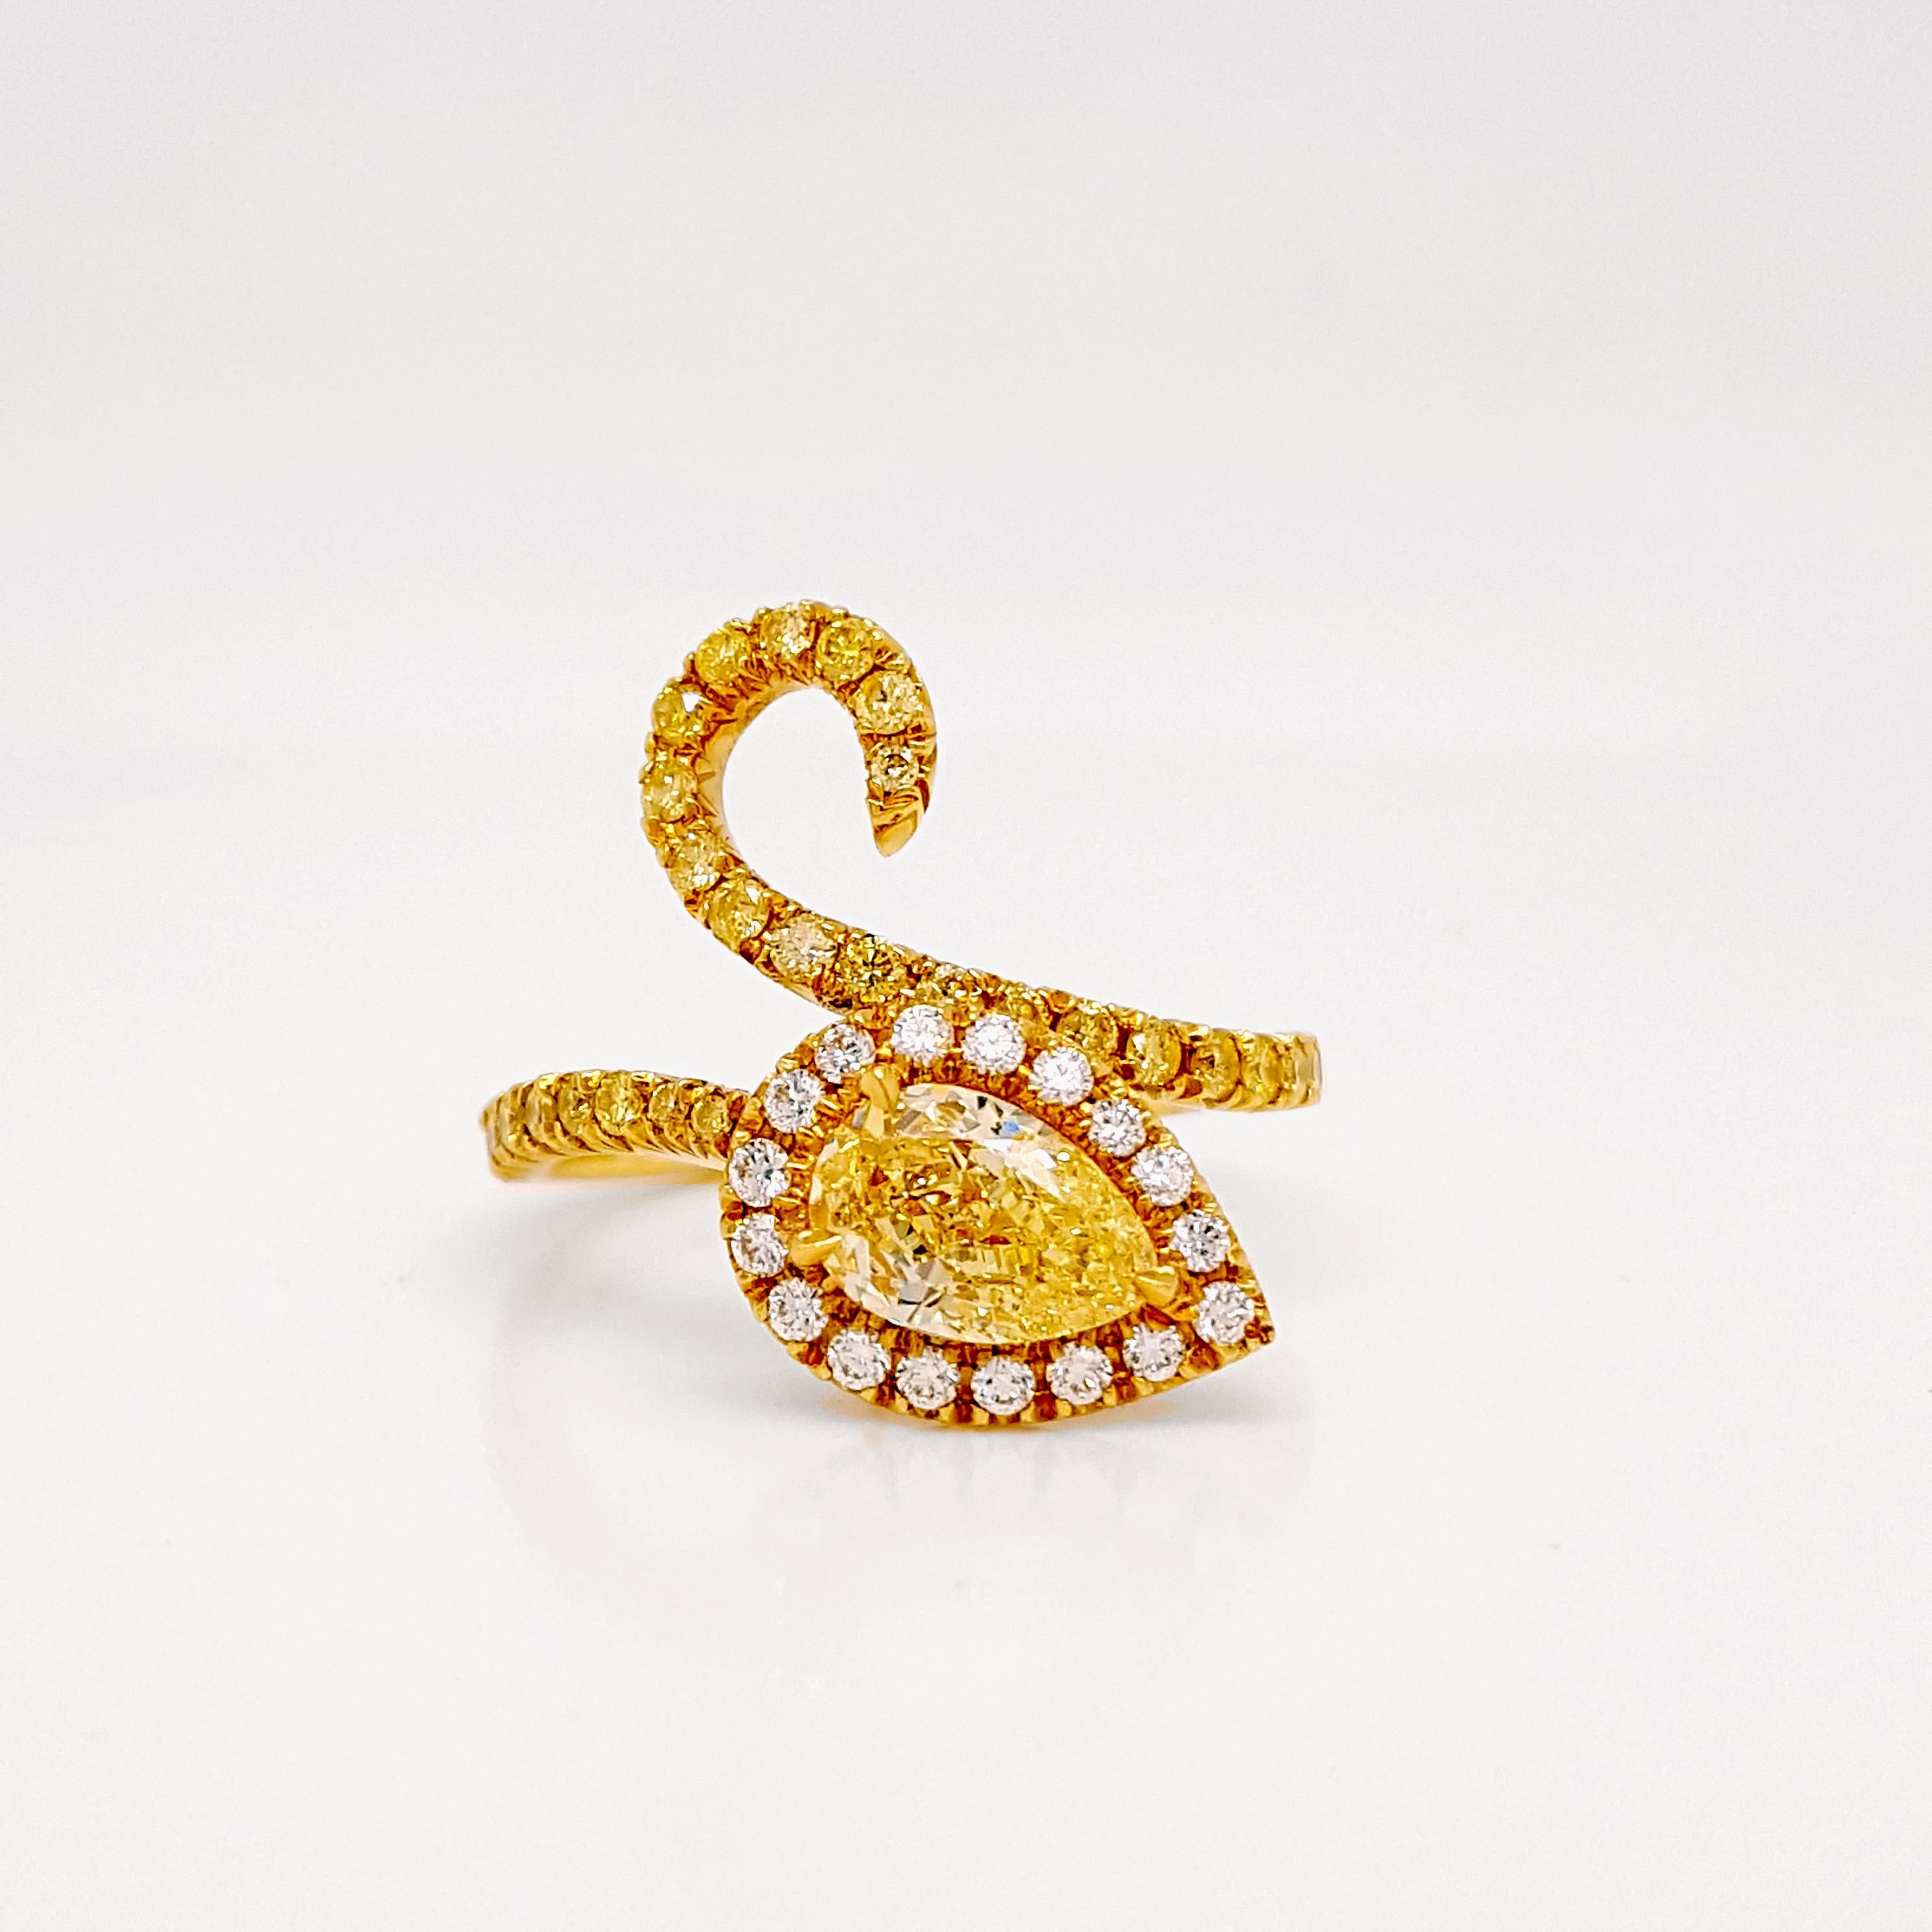 Pear Cut 1.50 Carat Fancy Yellow Diamond and Pave’ diamonds Cocktail Ring, GIA Certified. For Sale